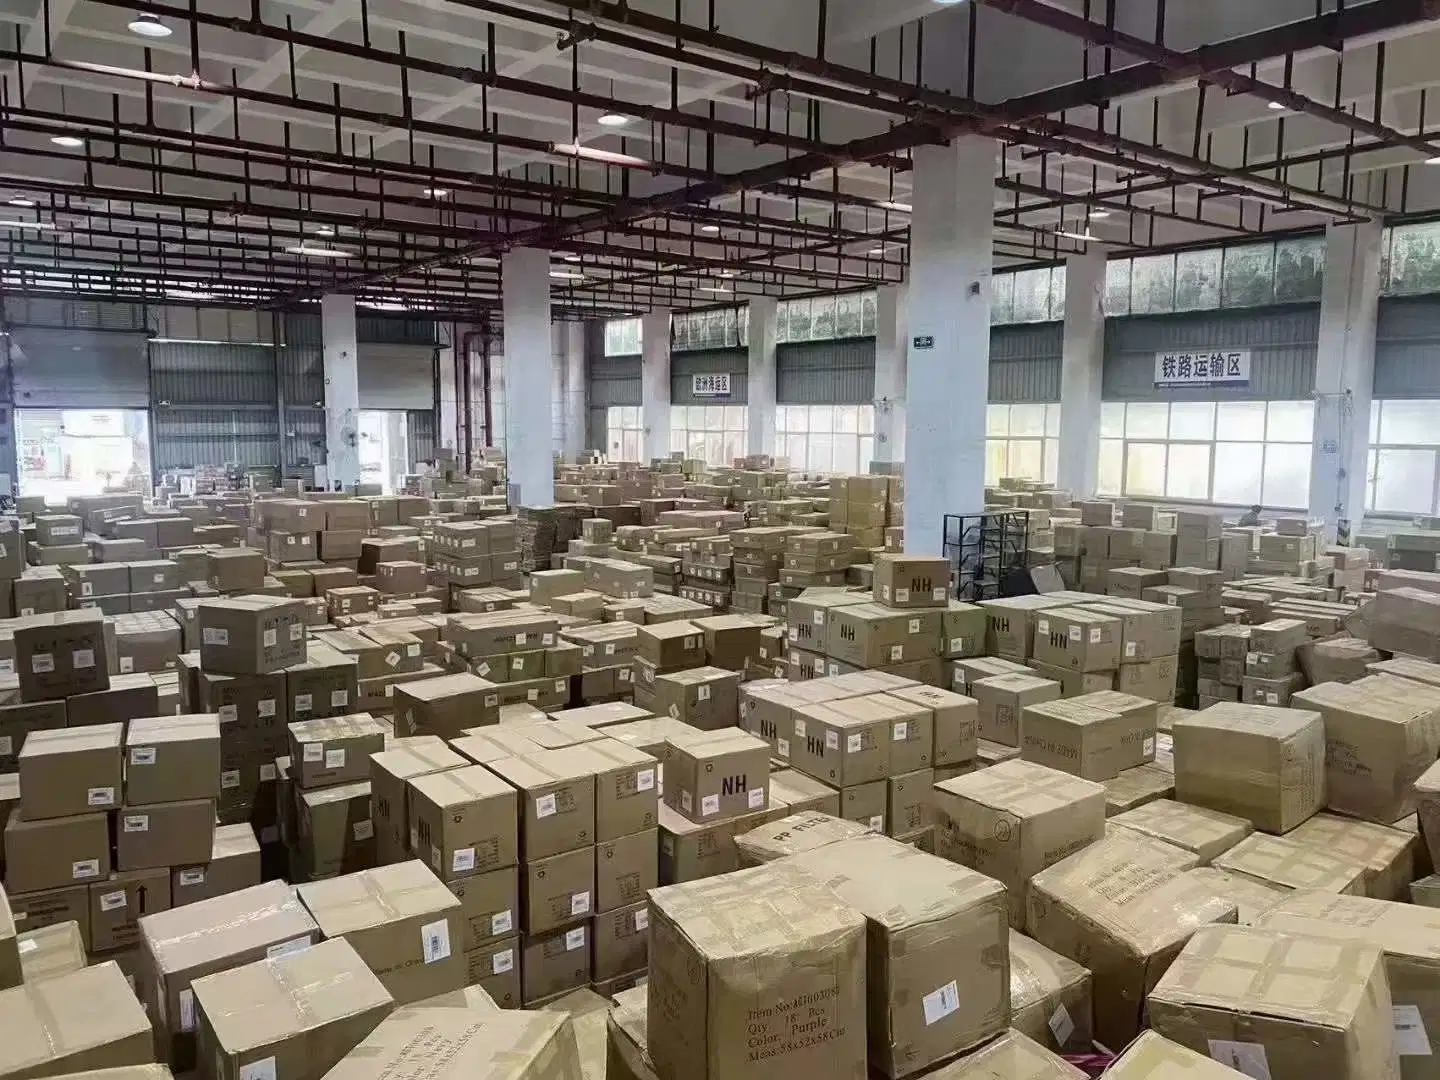 Air Flight /Sea Freight UPS Express UPS /DHL Delivery to Amazon/USA